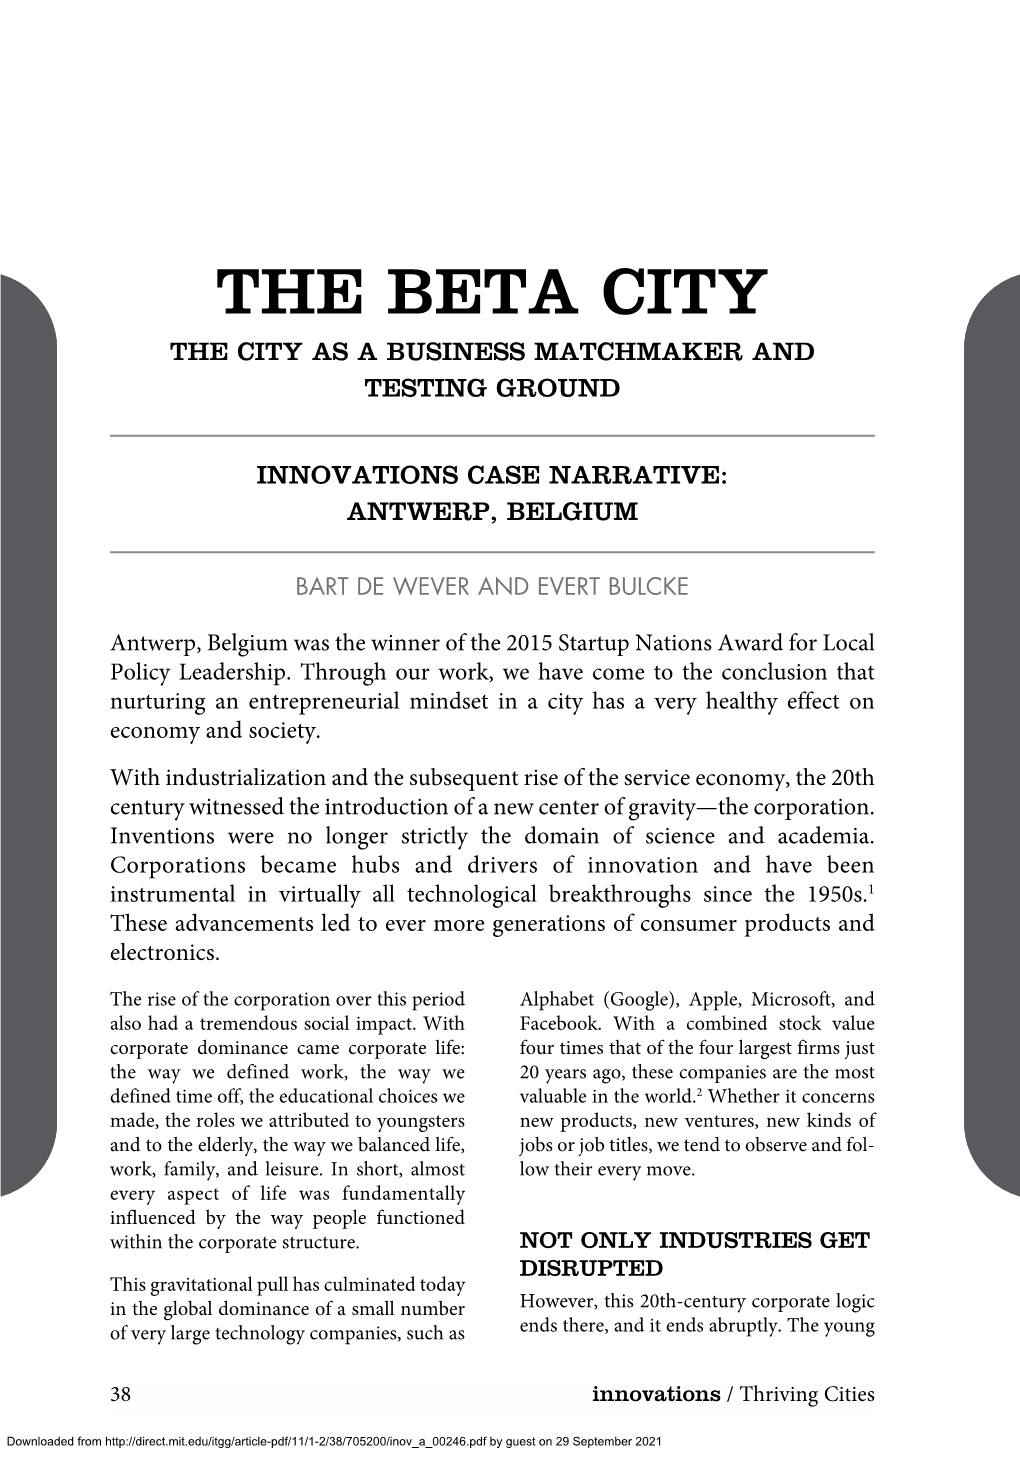 The Beta City the City As a Business Matchmaker and Testing Ground